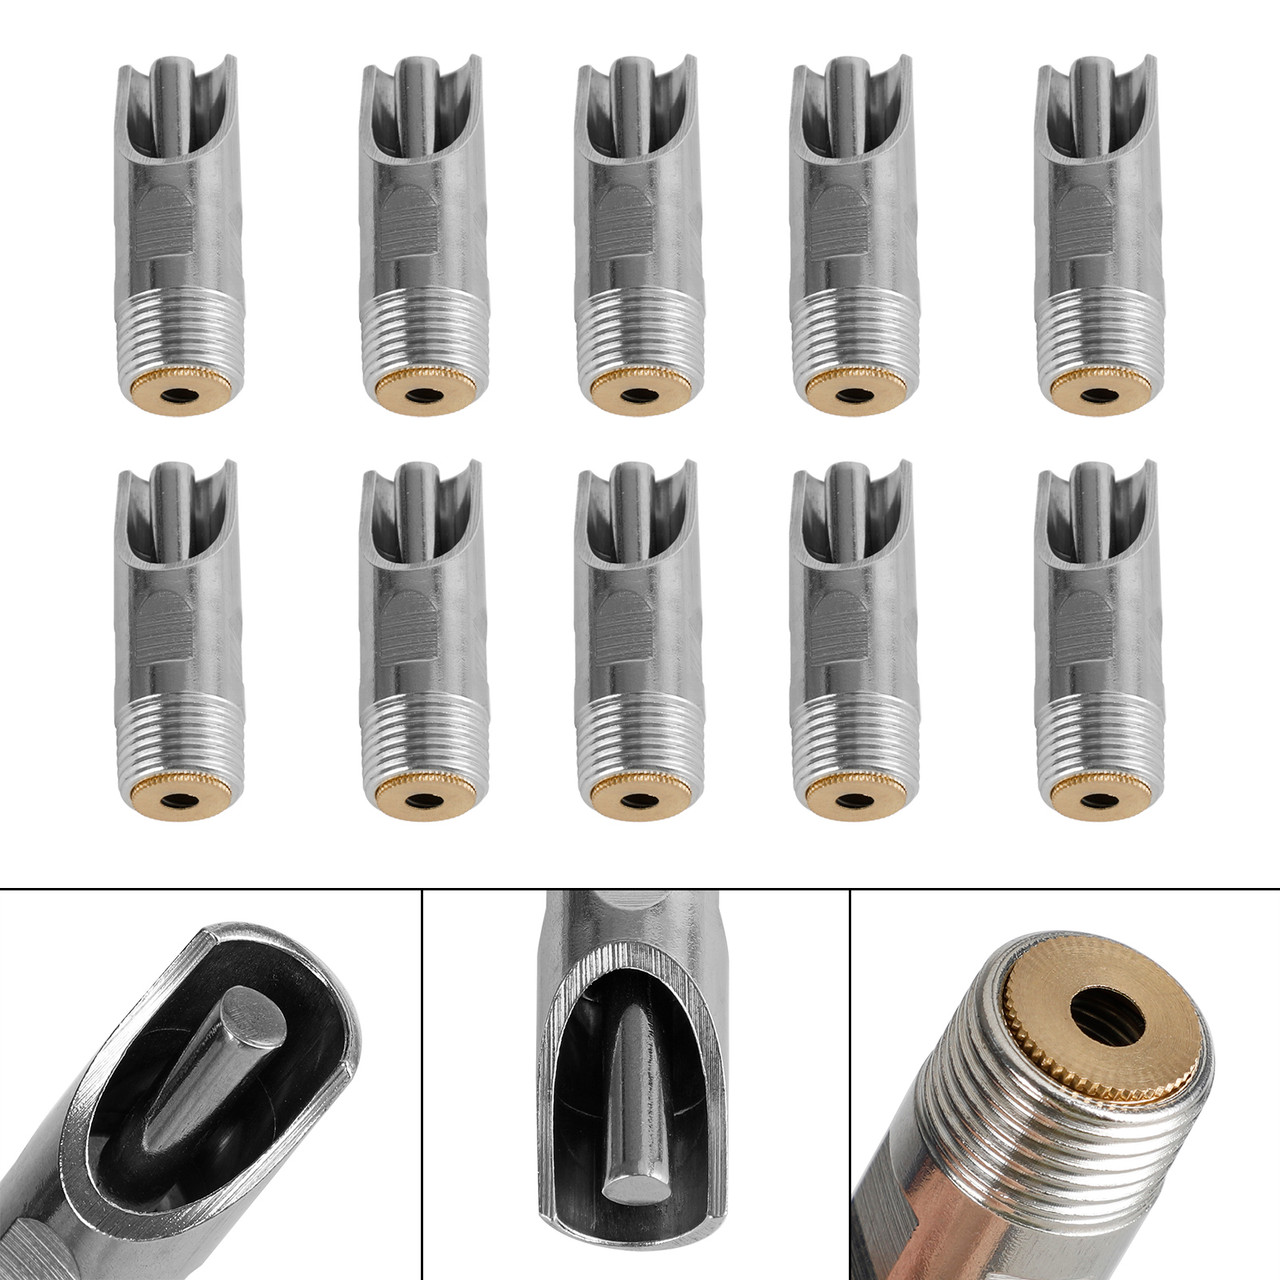 10Pcs 1/2" Thread Stainless Steel Nipple Drinker Waterer Rodents Cattle Pig Hog